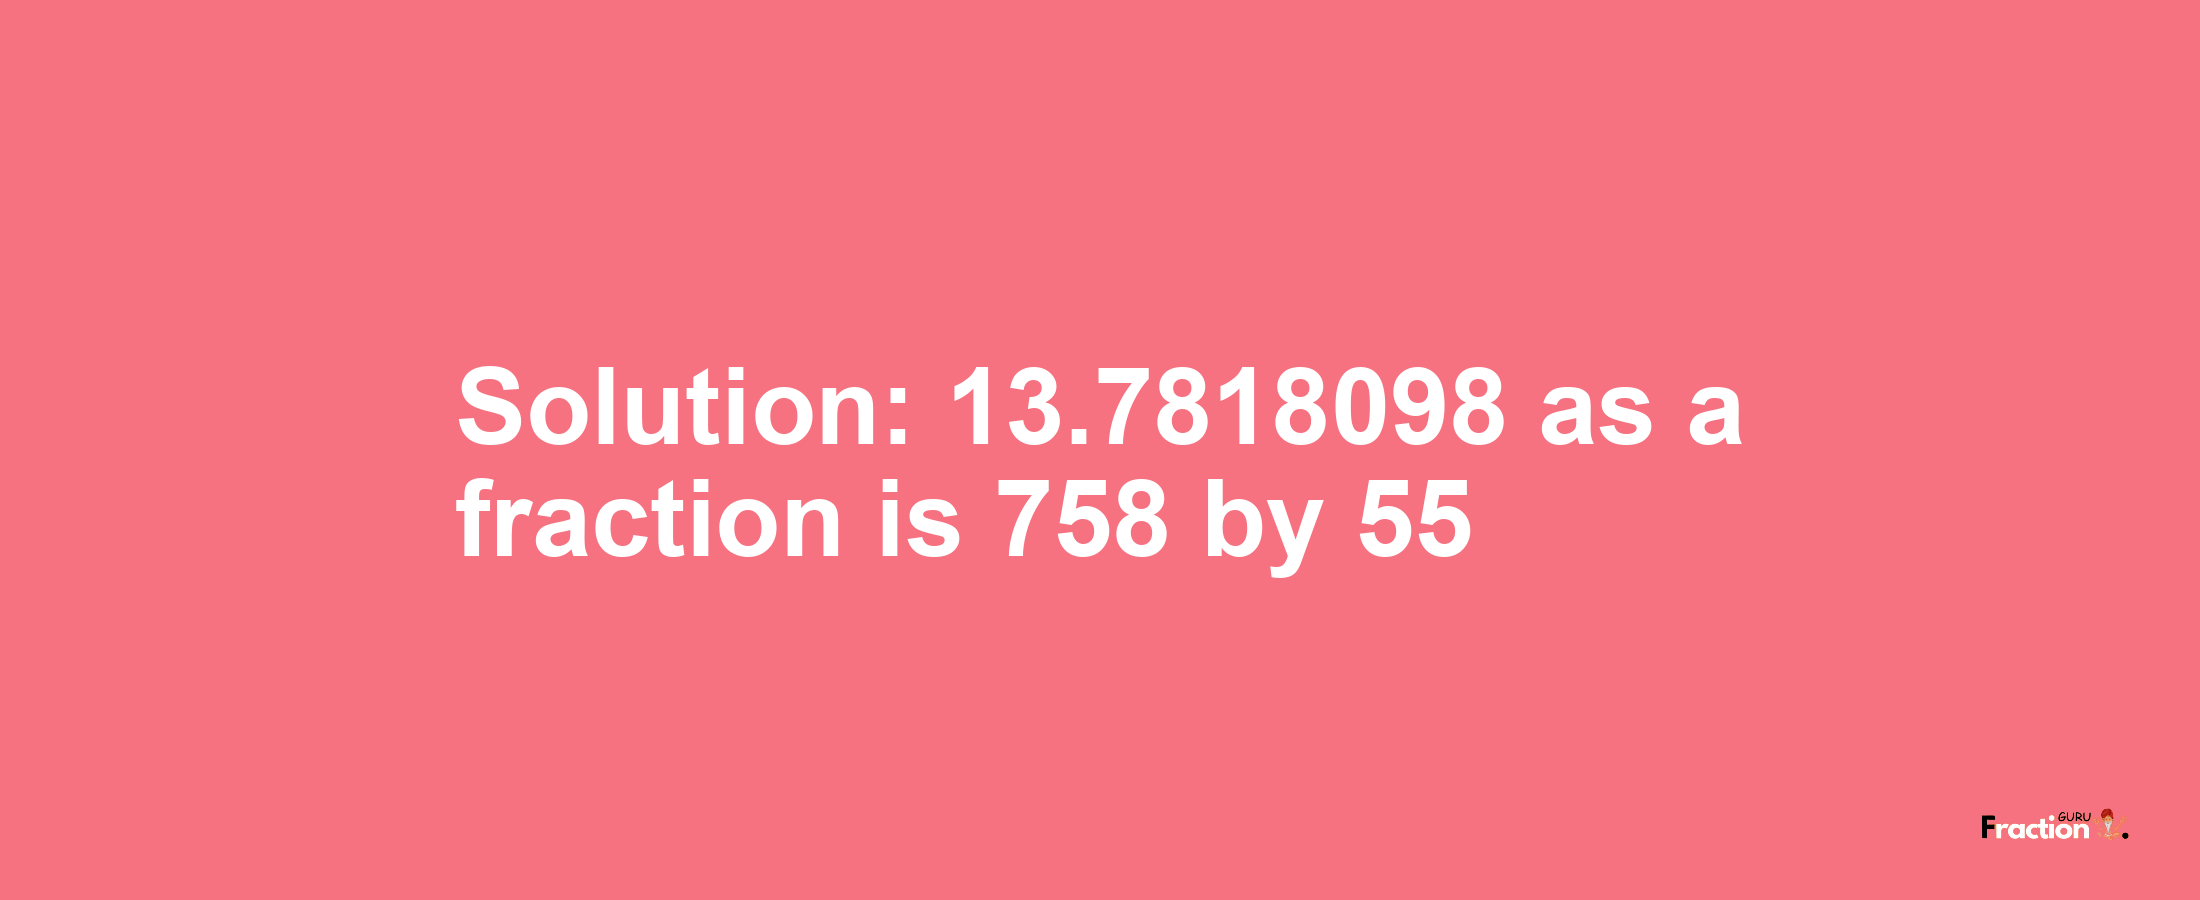 Solution:13.7818098 as a fraction is 758/55